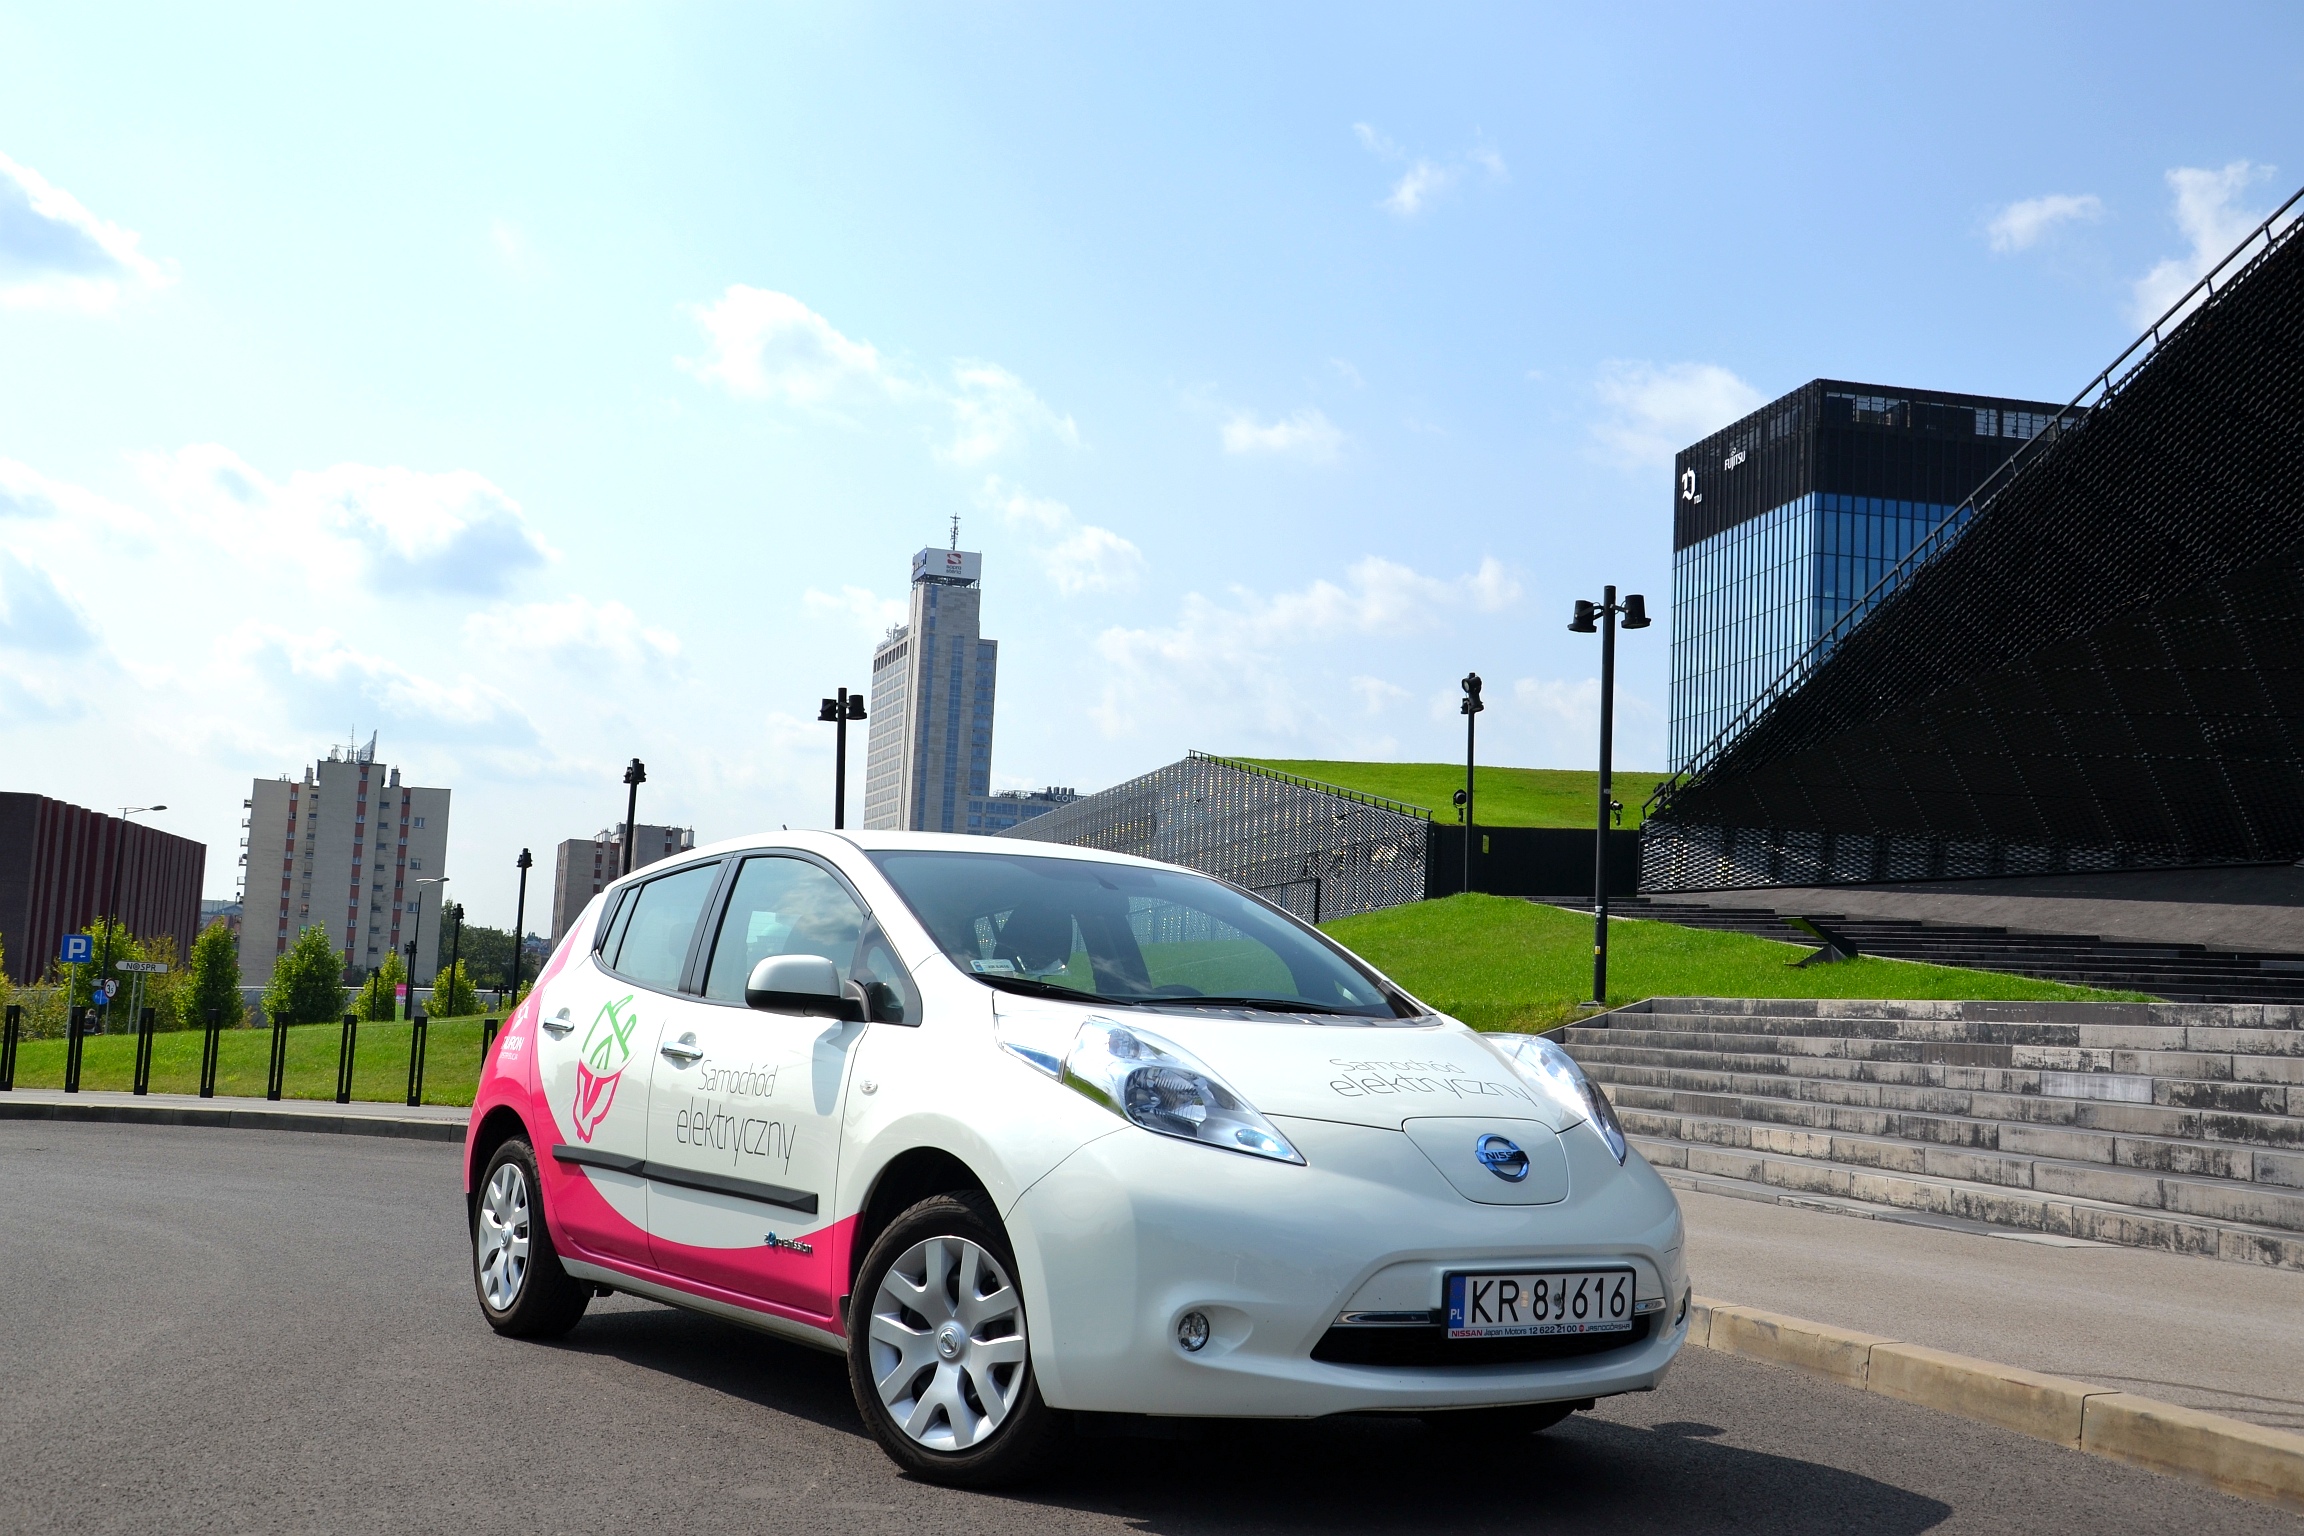 TAURON Launches An EV Car-Sharing Service in Katowice Just In Time For COP24